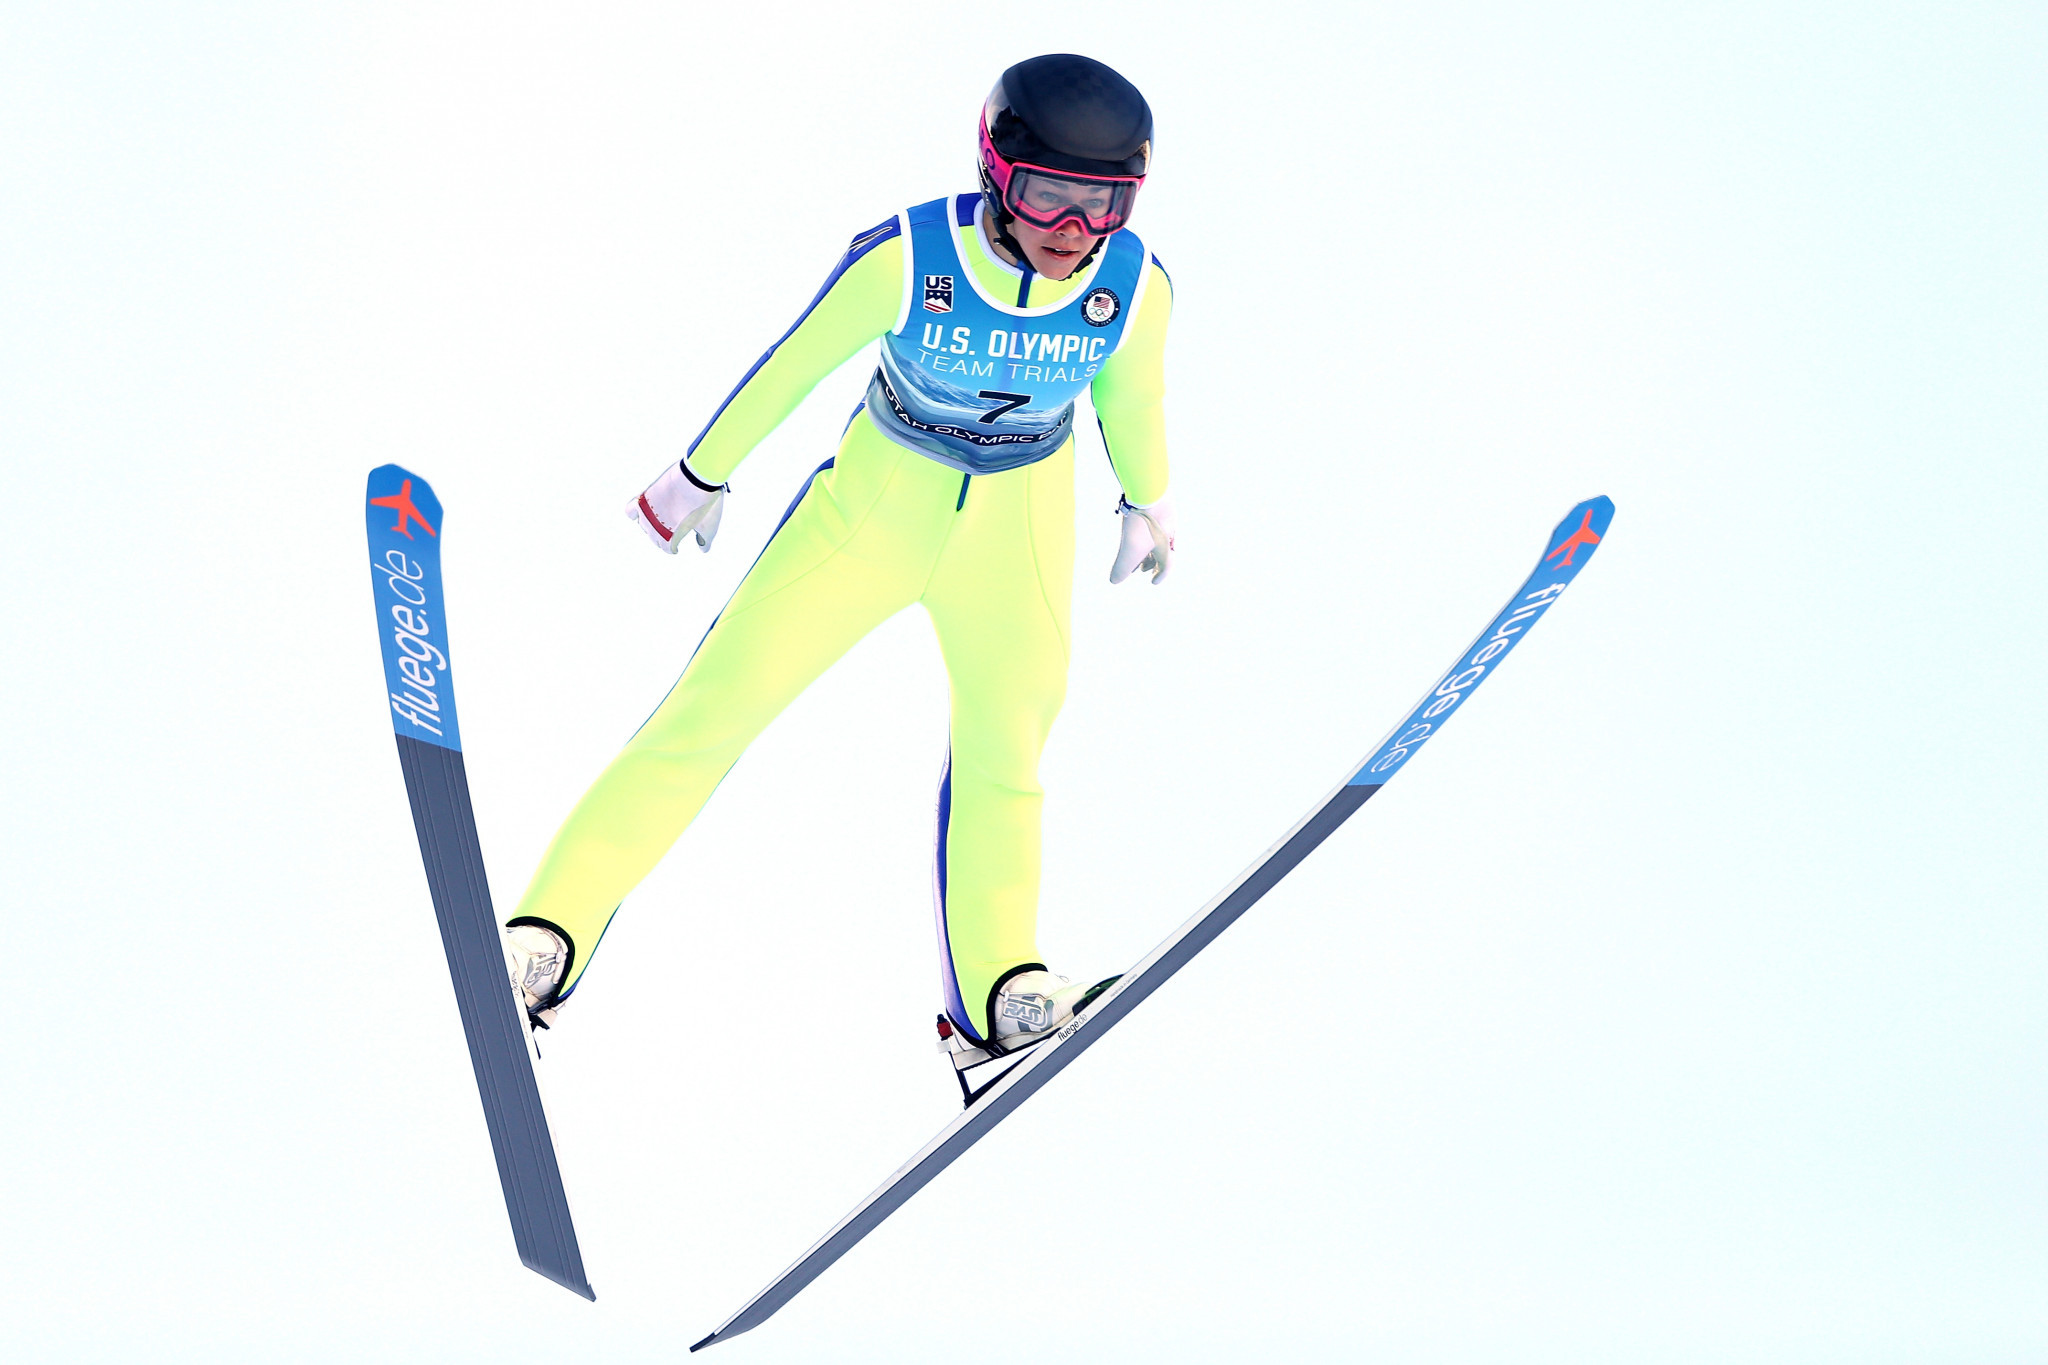 Ski jumping duo and Nordic combined athlete secure places on US team for Pyeongchang 2018